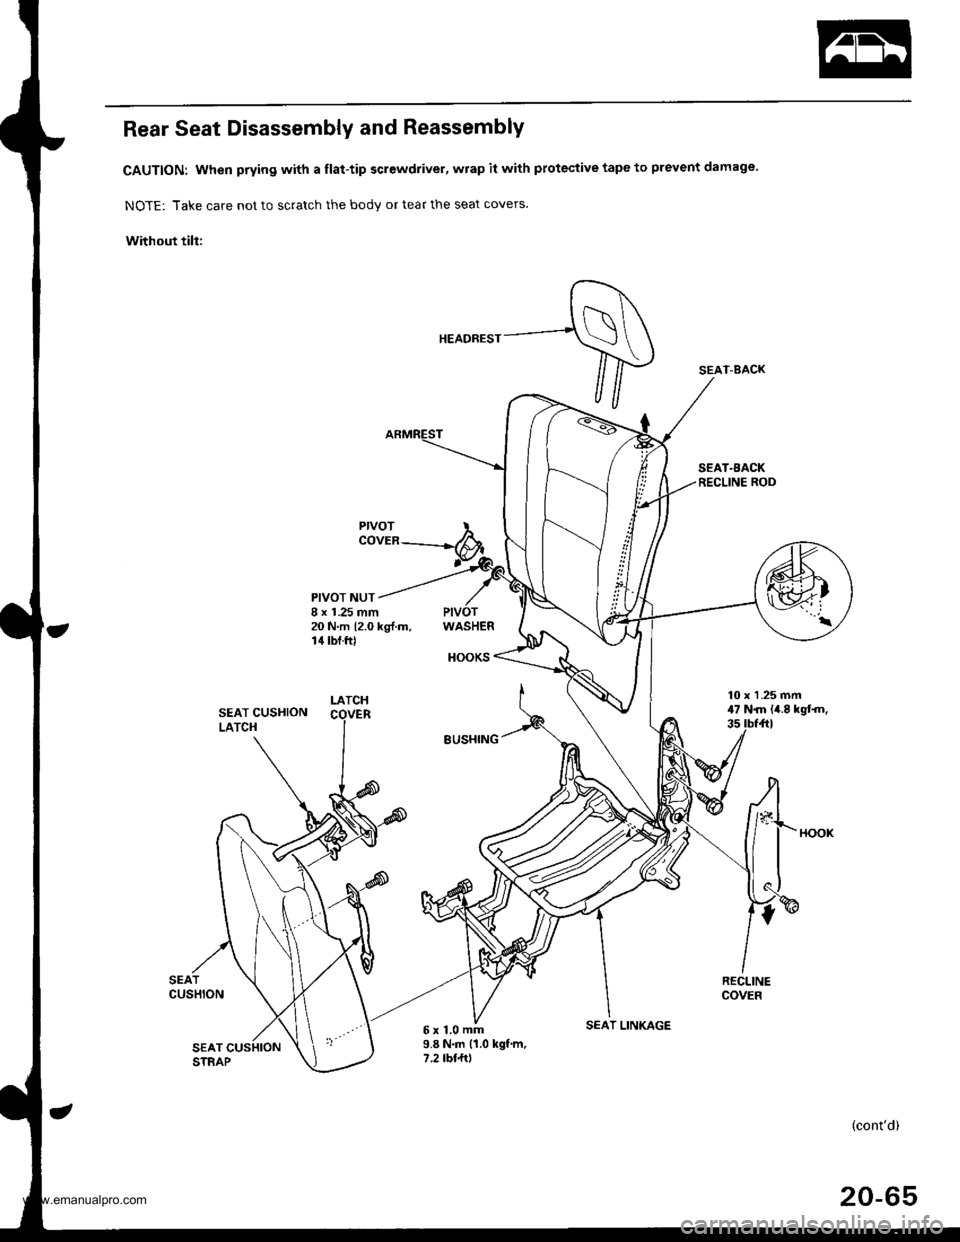 HONDA CR-V 1999 RD1-RD3 / 1.G Workshop Manual 
Rear Seat Disassembly and Reassembly
CAUTION: When prying with a flat-tip screwdriver, wrap it with protective tape to prevent damage.
NOTE: Take care not to scratch the body or tear the seat covers.